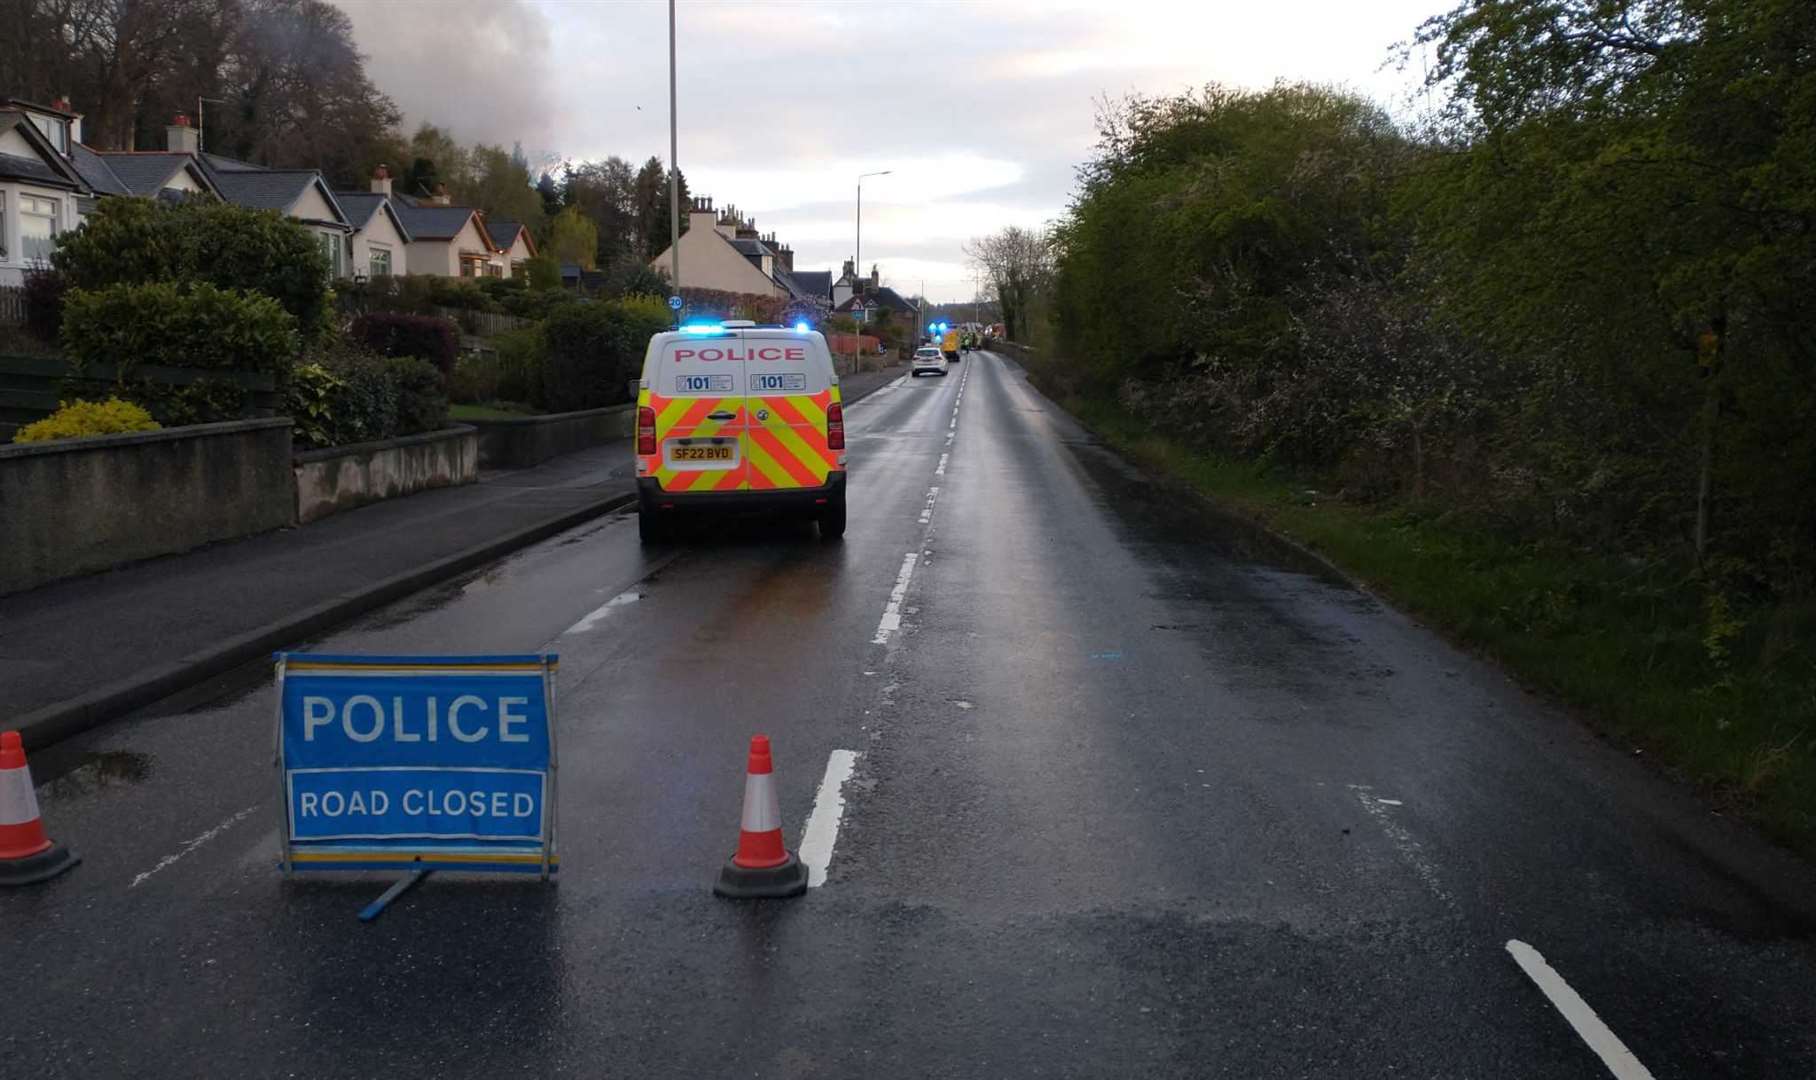 Police road block on Clachnaharry Road after fire overnight, with smoke visible in distance.